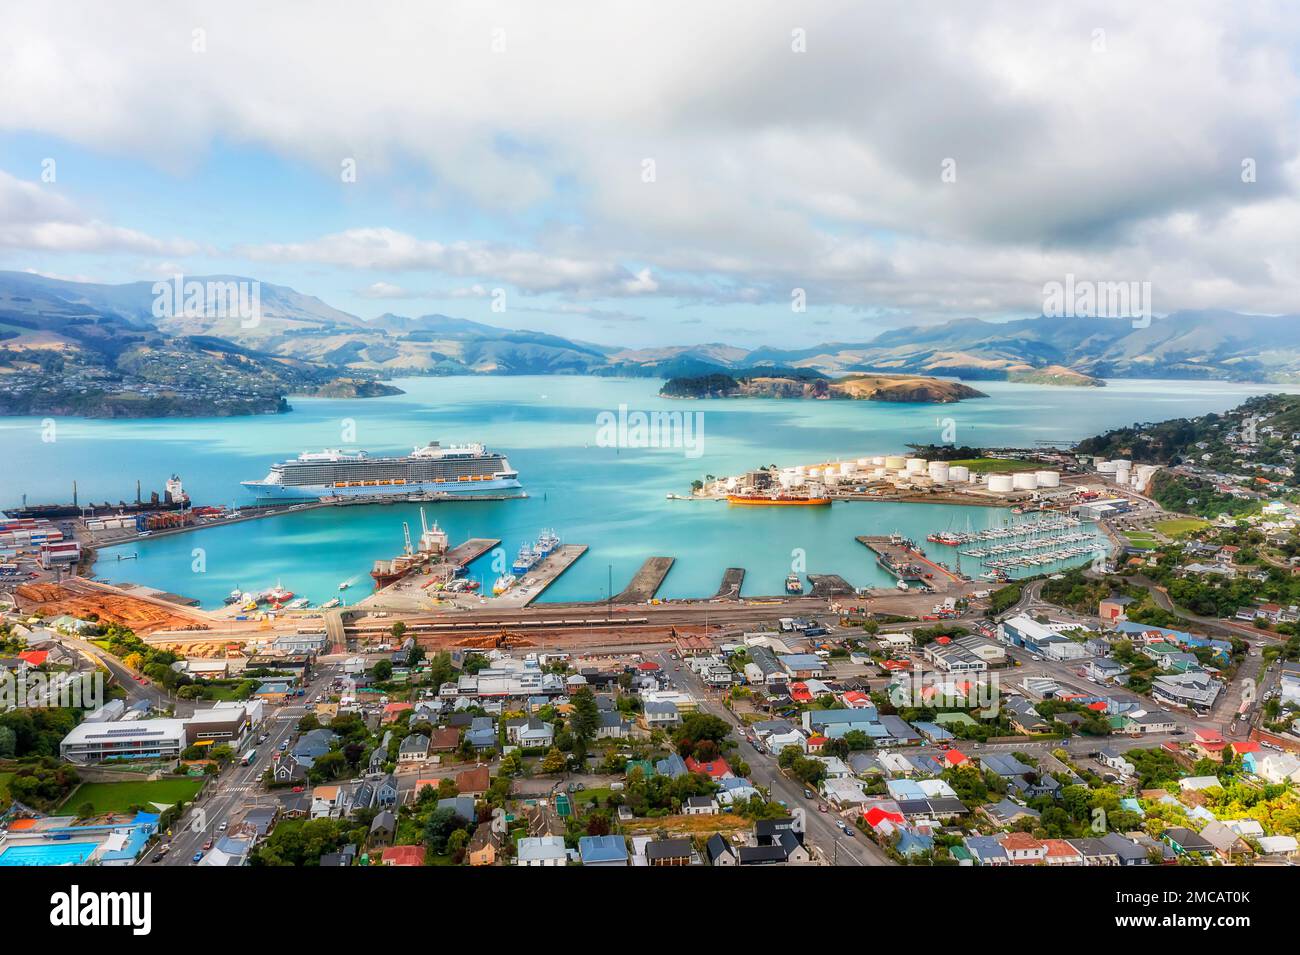 Industrial port, passenger and cargo terminal in Lyttleton town harbour on Pacific coast of New Zealand near Christchurch. Stock Photo